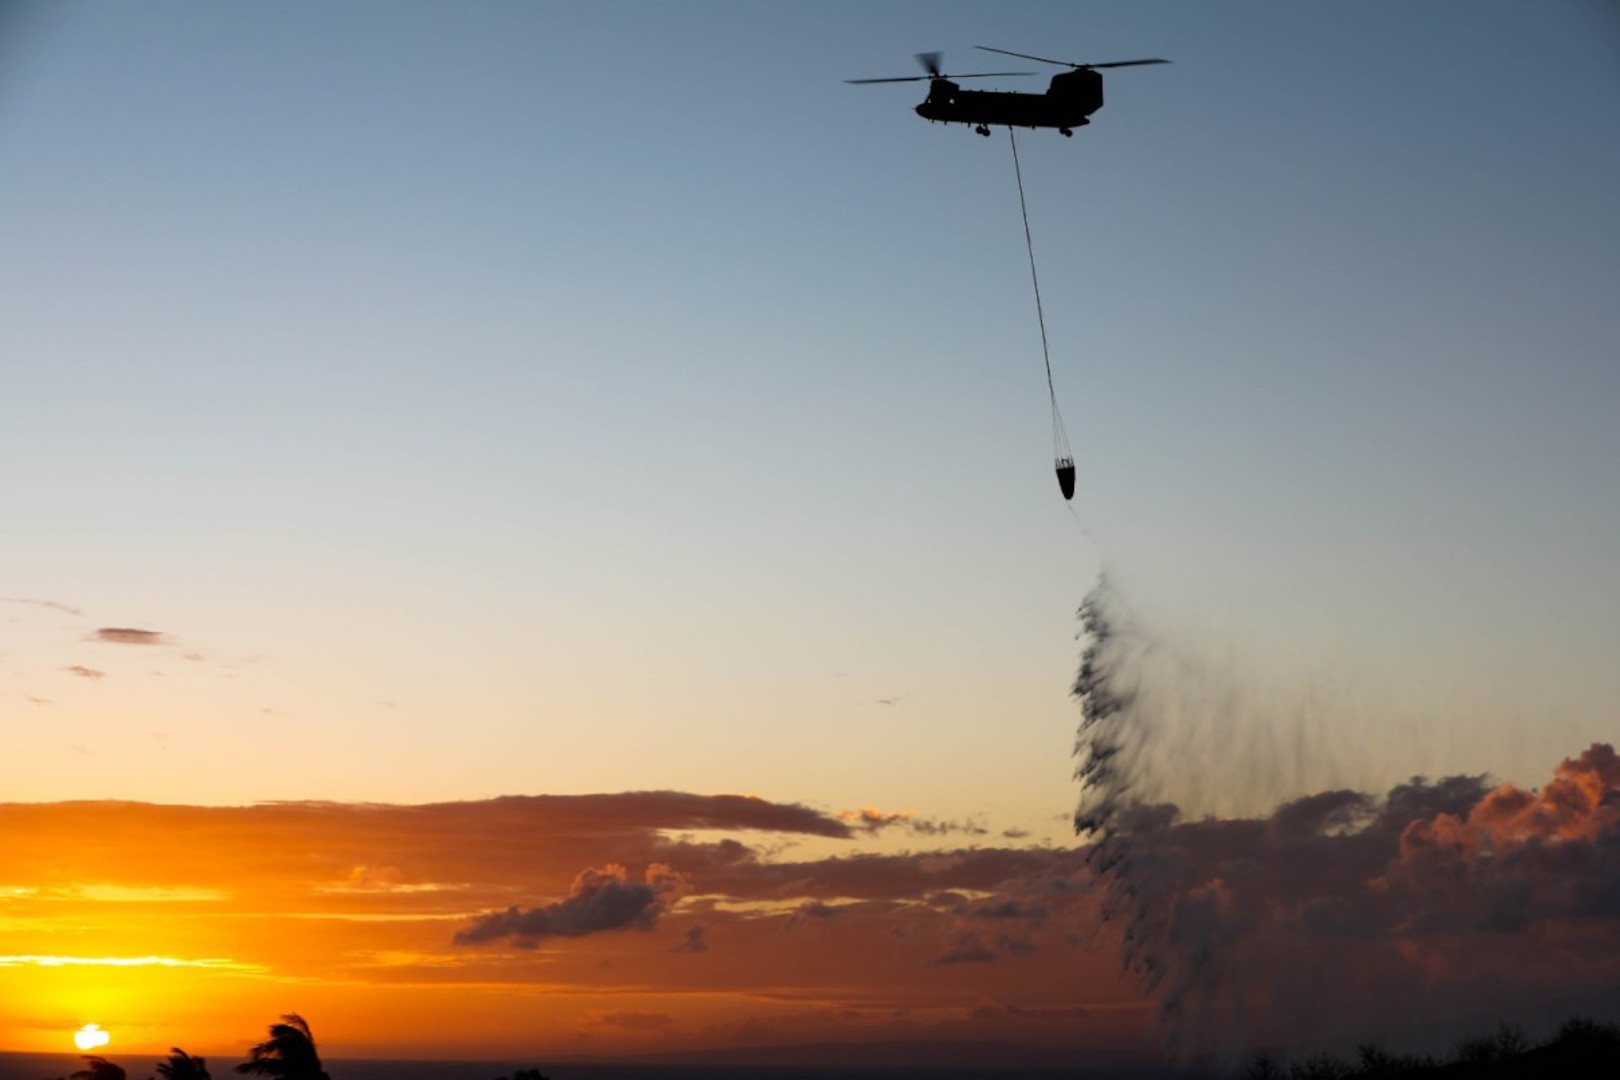 Hawaii National Guard Joint Task Force 5-0 Soldiers drop water on wildfires in Ka'anapali, Maui, Aug. 26, 2023. In support of Maui County authorities, Joint Task Force 5-0, composed of the Hawaii Army and Air National Guard, Army active duty and Reserve, is dedicated to the safety and recovery of affected Maui residents, coordinating with local first responders and adhering to local, state and federal guidelines and laws.